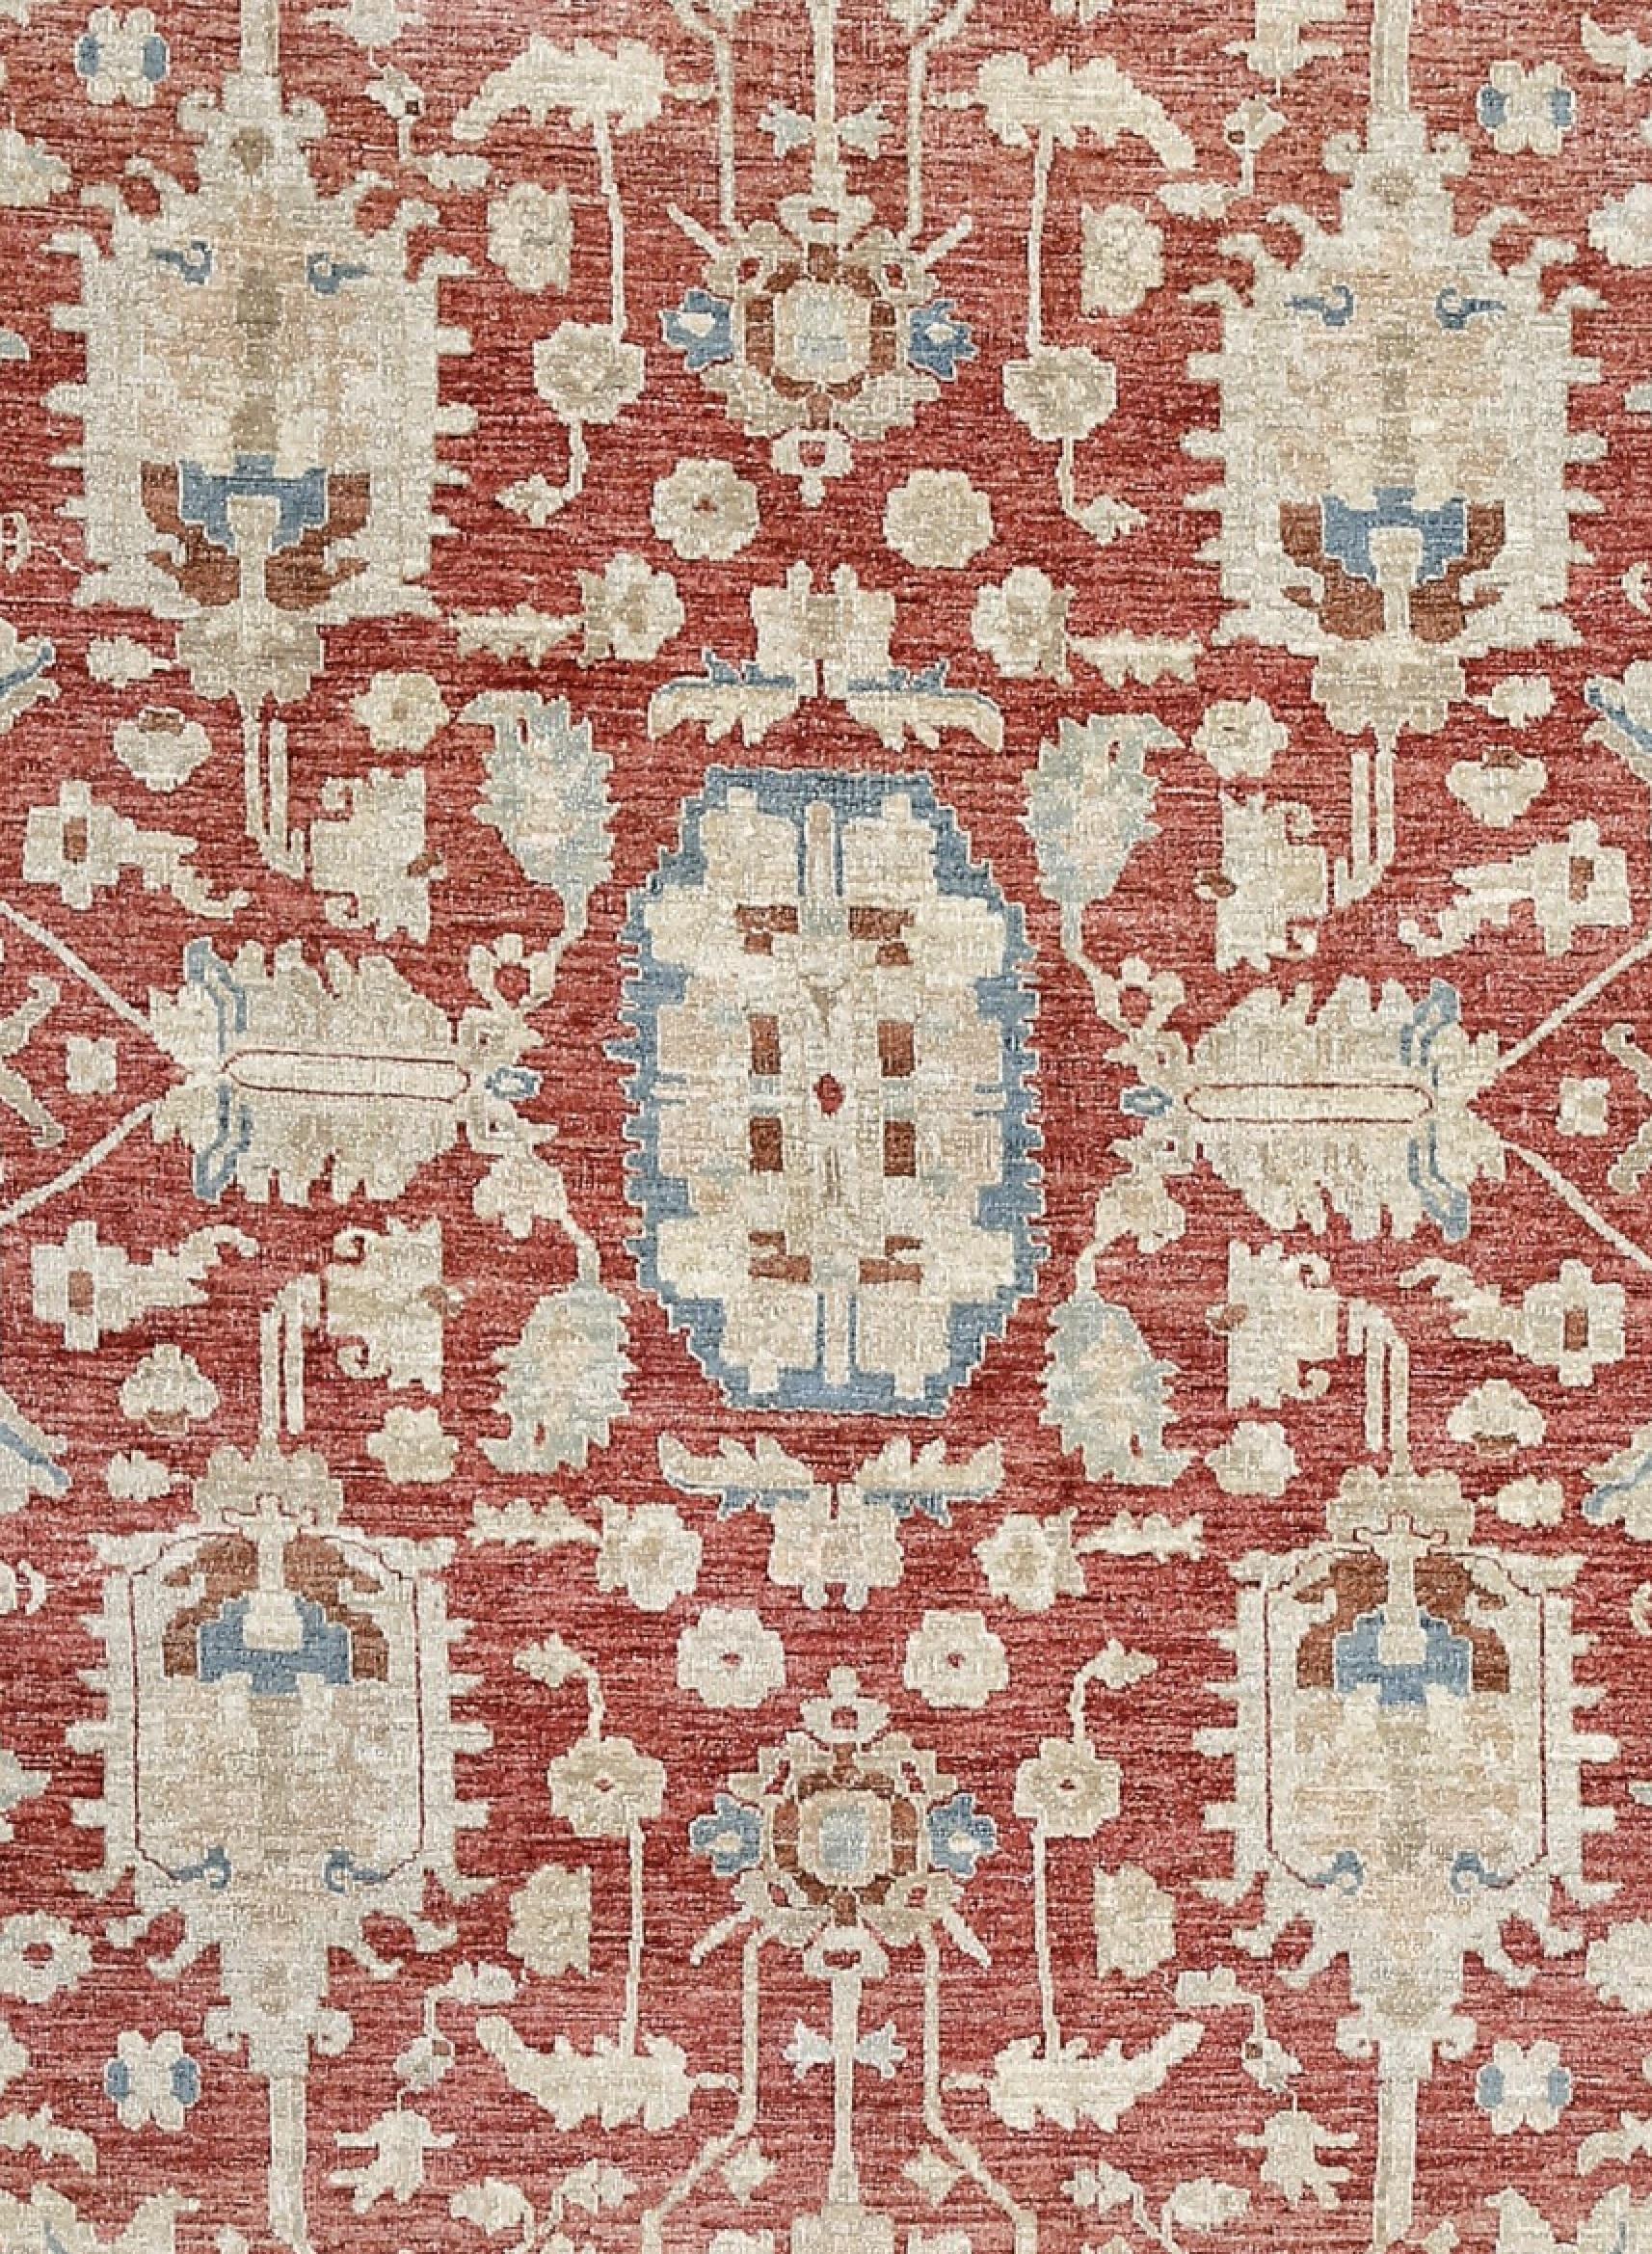 Oushak rugs are the most popular and one of the oldest traditional rugs. Oushak (Usak) rugs that use a particular family of designs, called by convention after the city of Ushak, Turkey. Oushak rugs are known for the silky, luminous wool they work